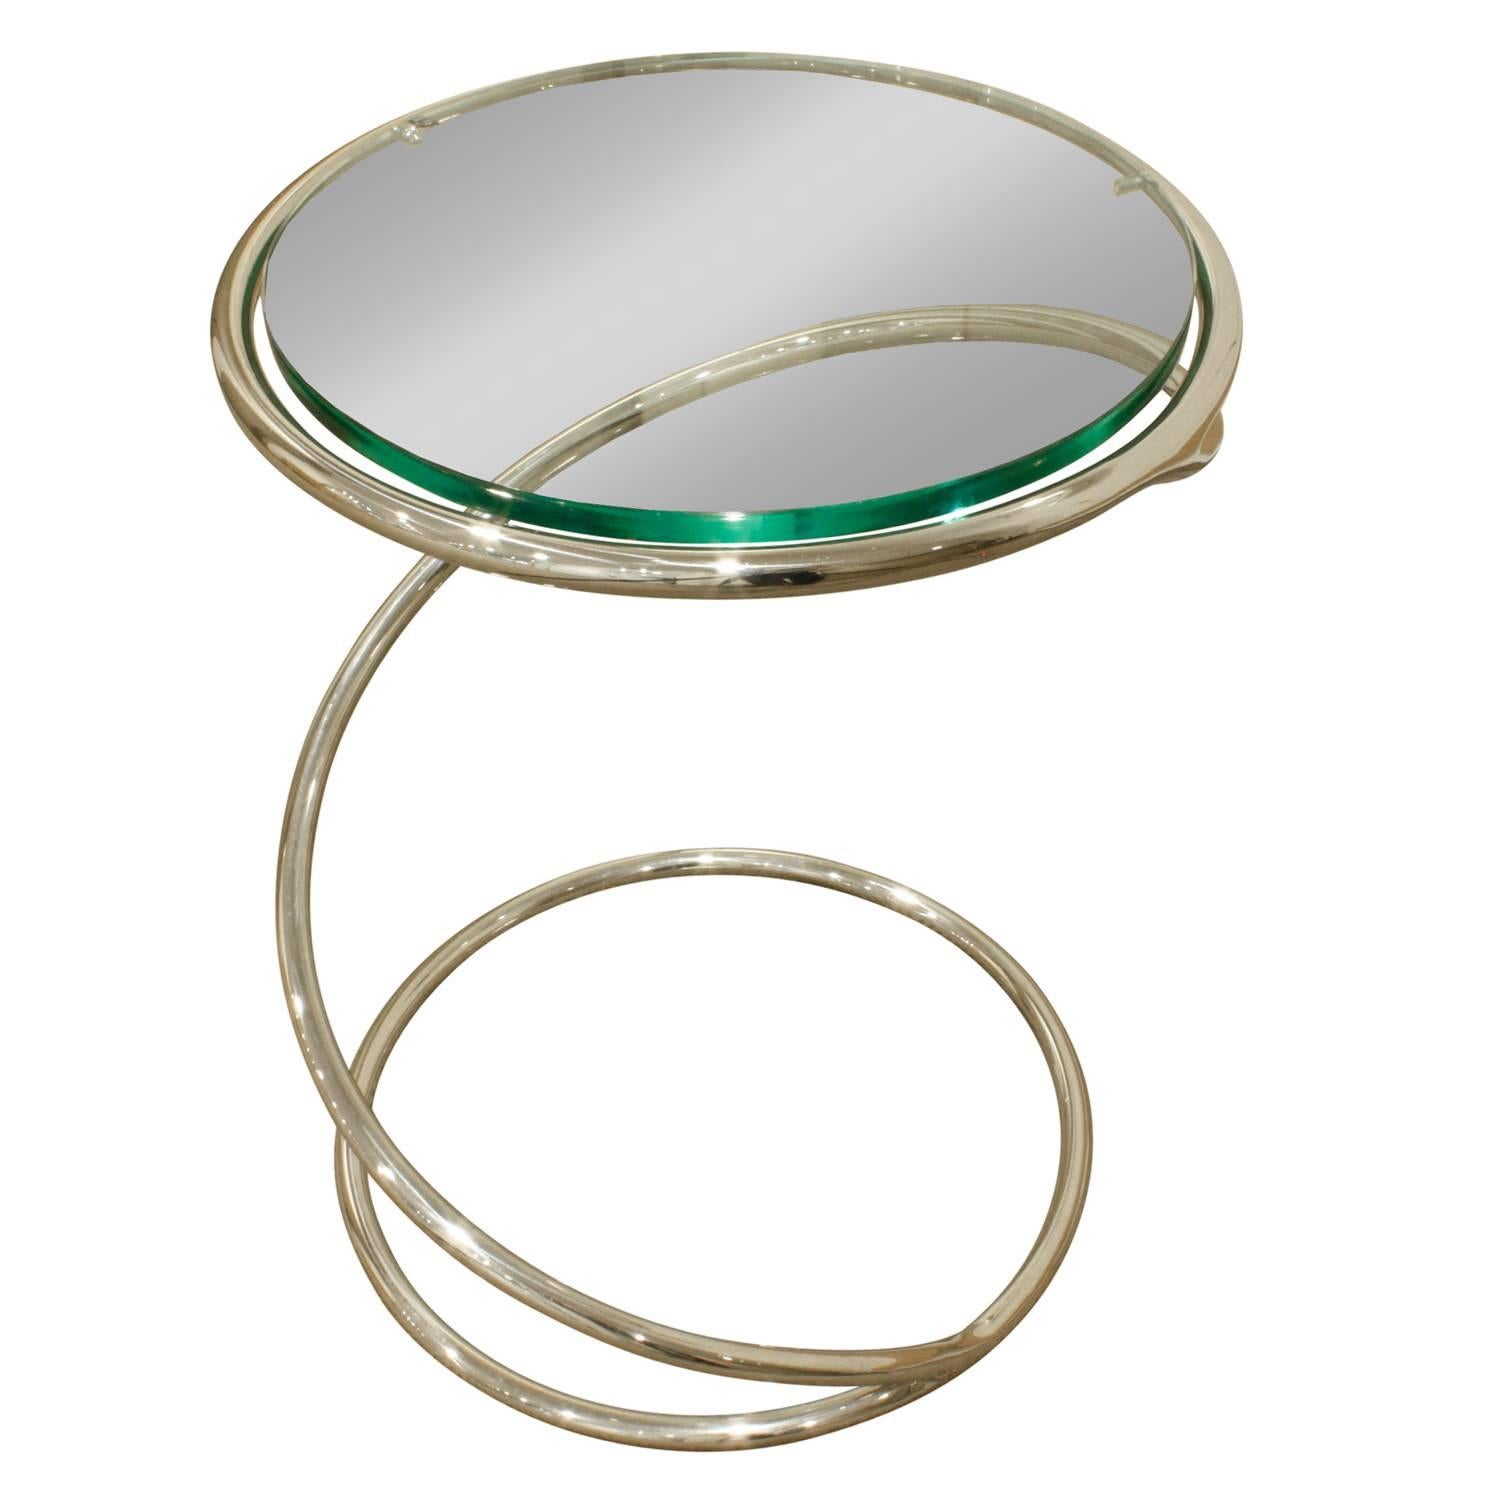 Coiled occasional table in polished chrome with glass top by Pace, American, 1970s.